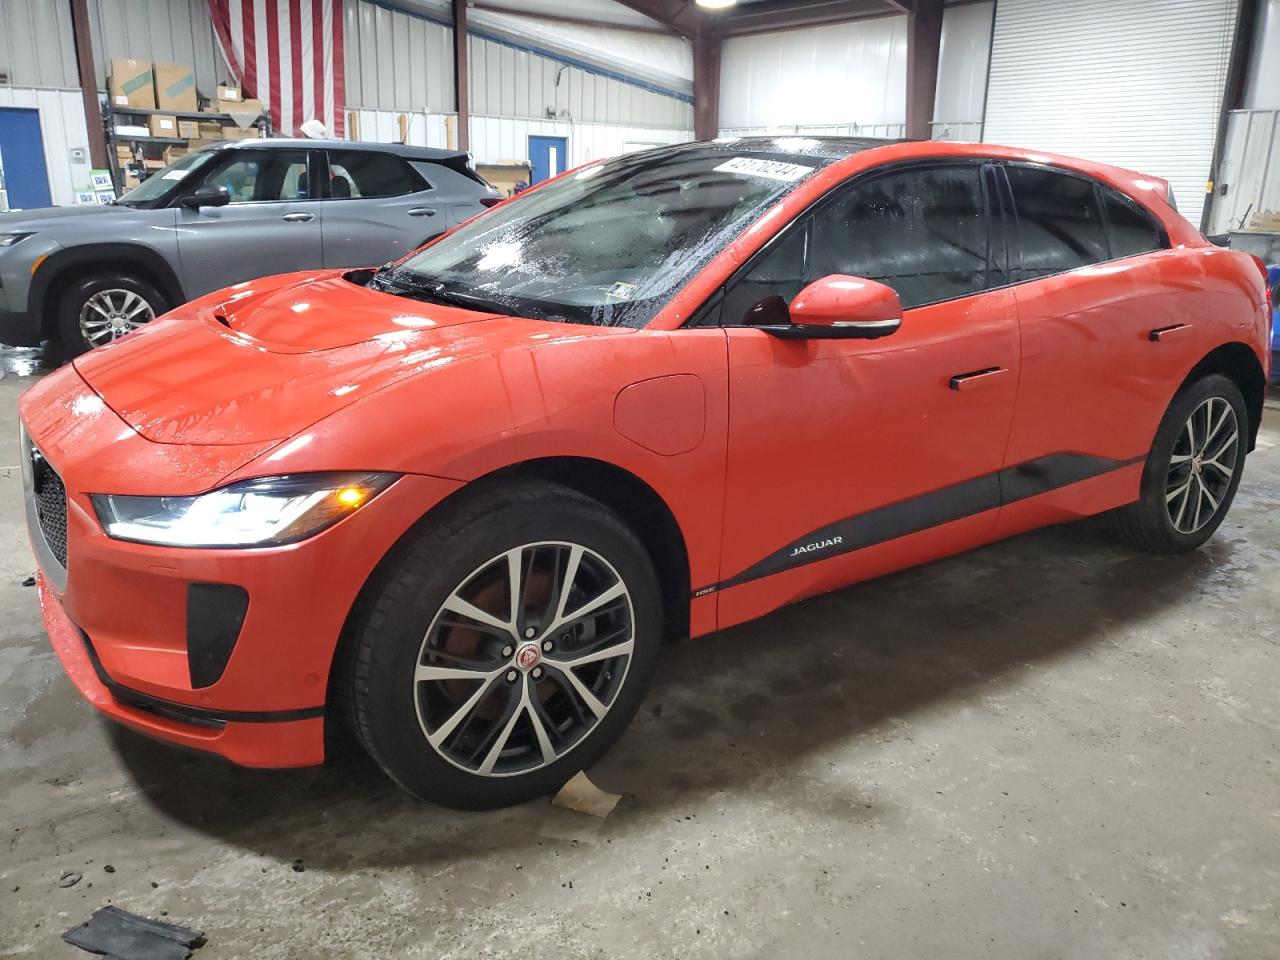 vin: SADHD2S19K1F65845 SADHD2S19K1F65845 2019 jaguar i-pace 0 for Sale in 15122 3431, Pa - Pittsburgh West, West Mifflin, USA